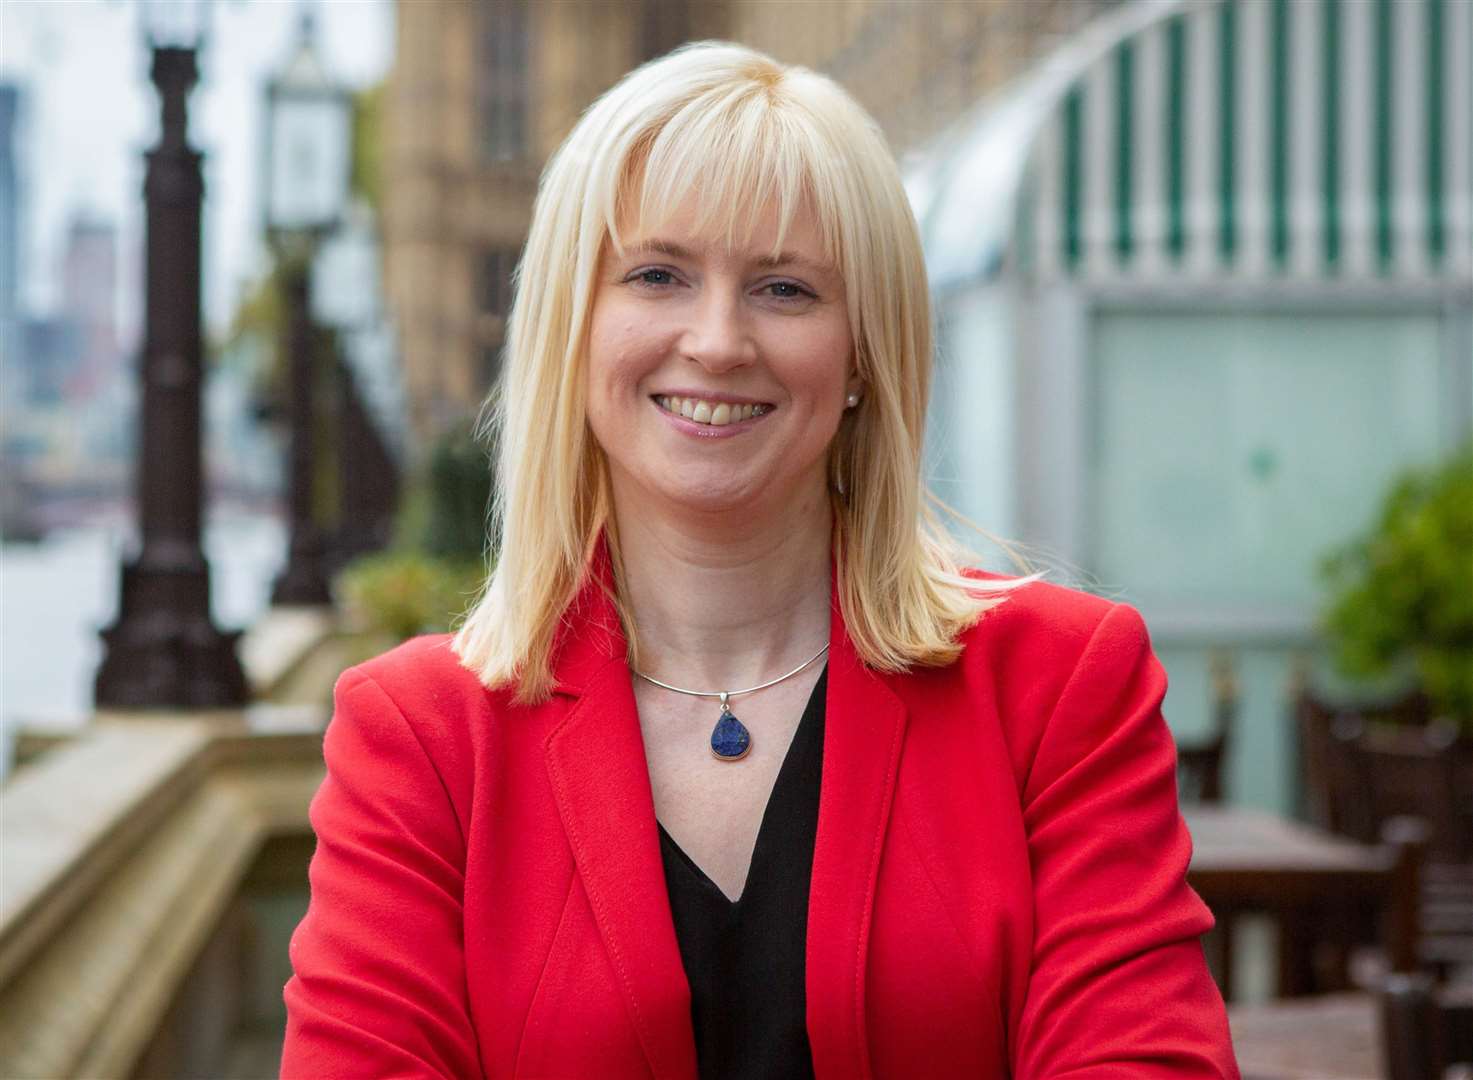 Labour candidate Rosie Duffield